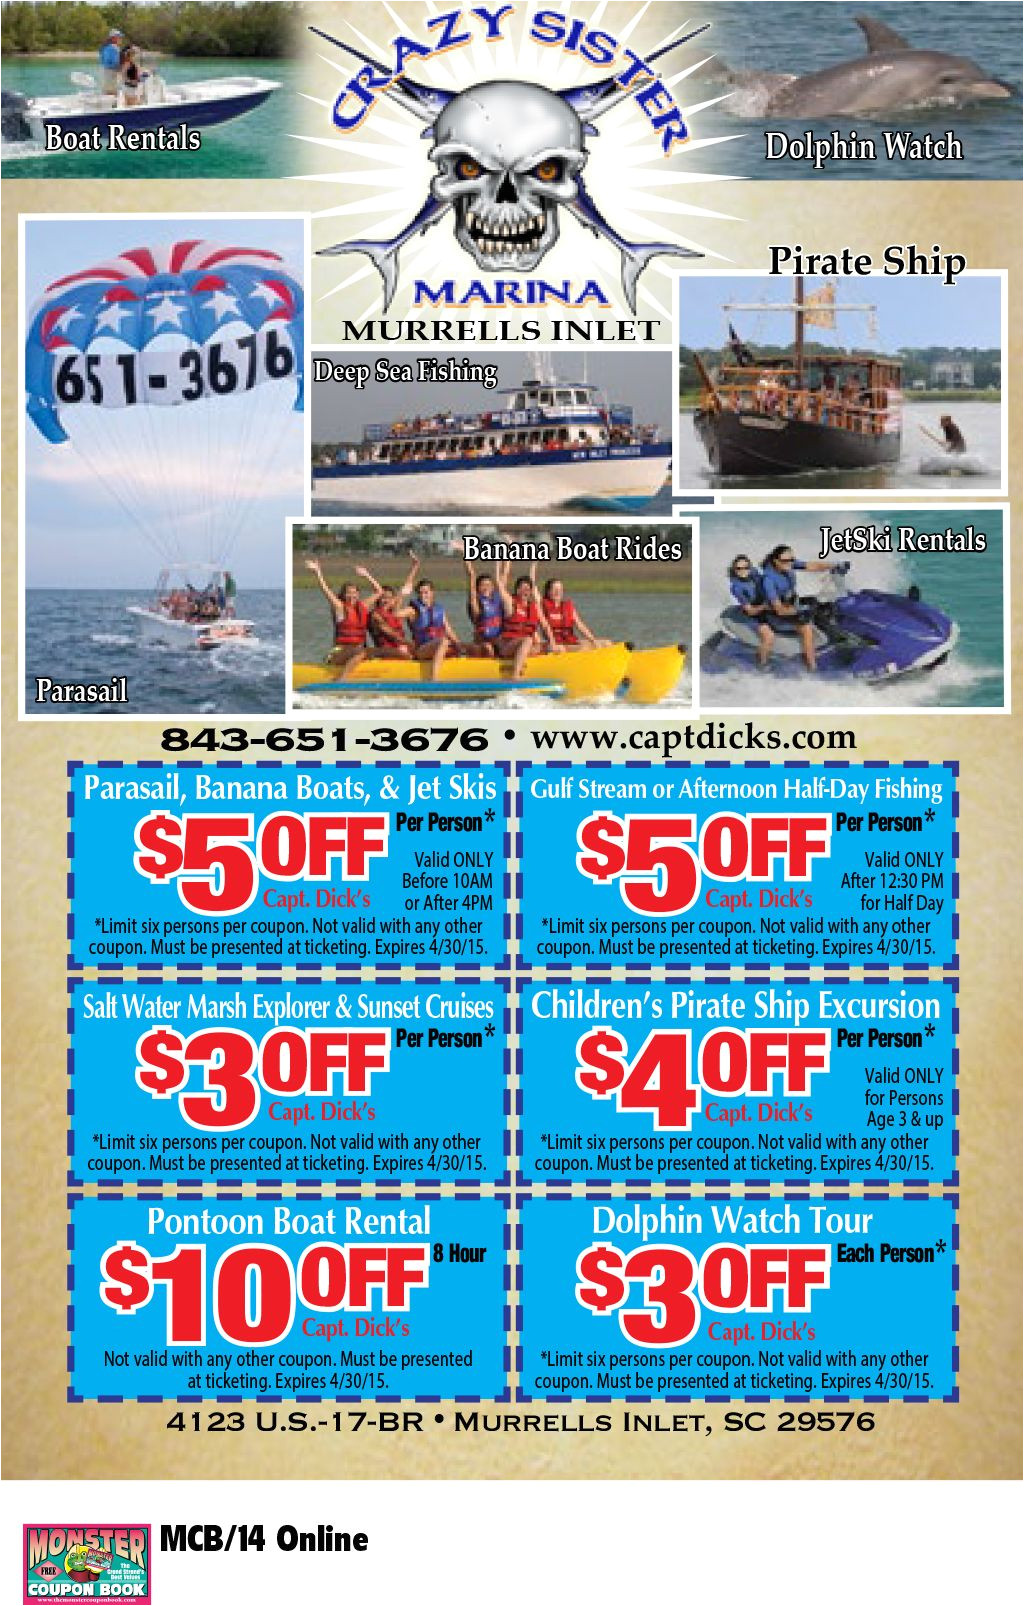 Fort Sumter tours Promo Code Crazy Sister Marina Myrtle Beach Resorts Coupons for Myrtle